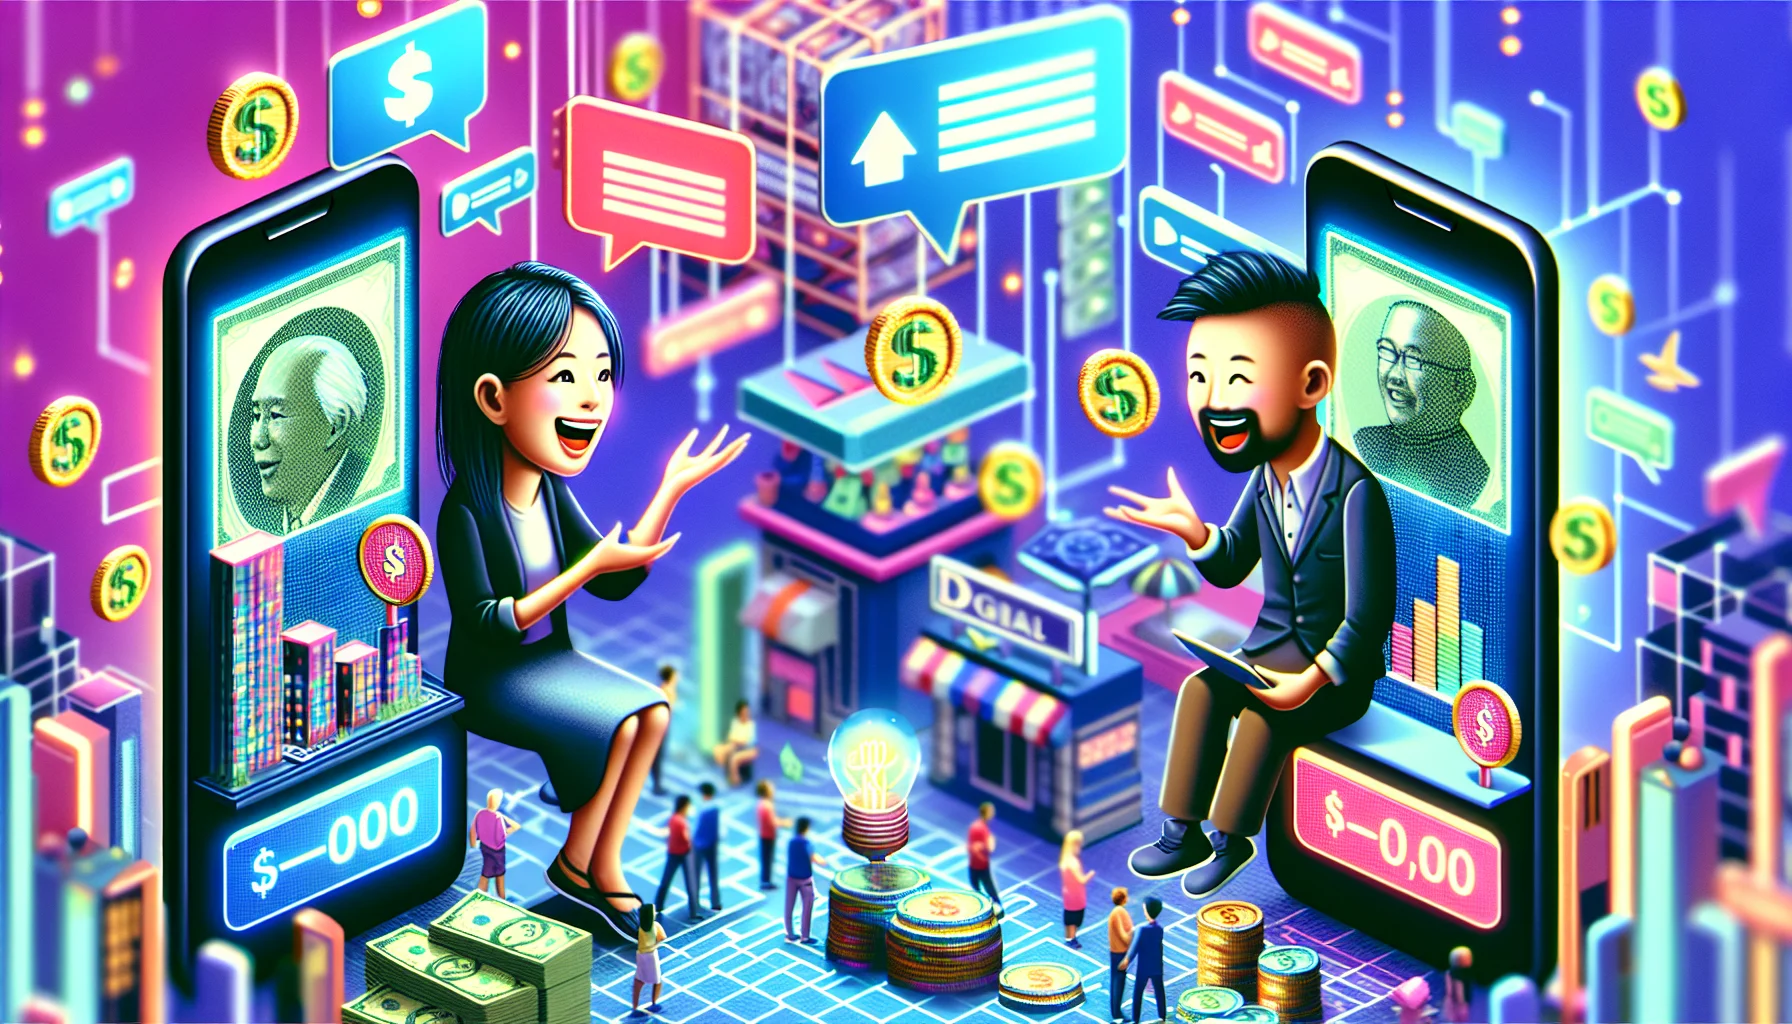 Create a humorous and realistic image of a mid-journey affiliate marketing program. Imagine a setting where an Asian female affiliate marketer is chatting enthusiastically with a Caucasian male customer inside a vibrant virtual marketplace. Display various digital products, each with a price tag showing potential online earnings. Add elements of humor like exaggerated dollar signs in their eyes, or cartoonish stacks of virtual coins and notes scattered around, capturing the allure and potential profitability of the online money-making venture.